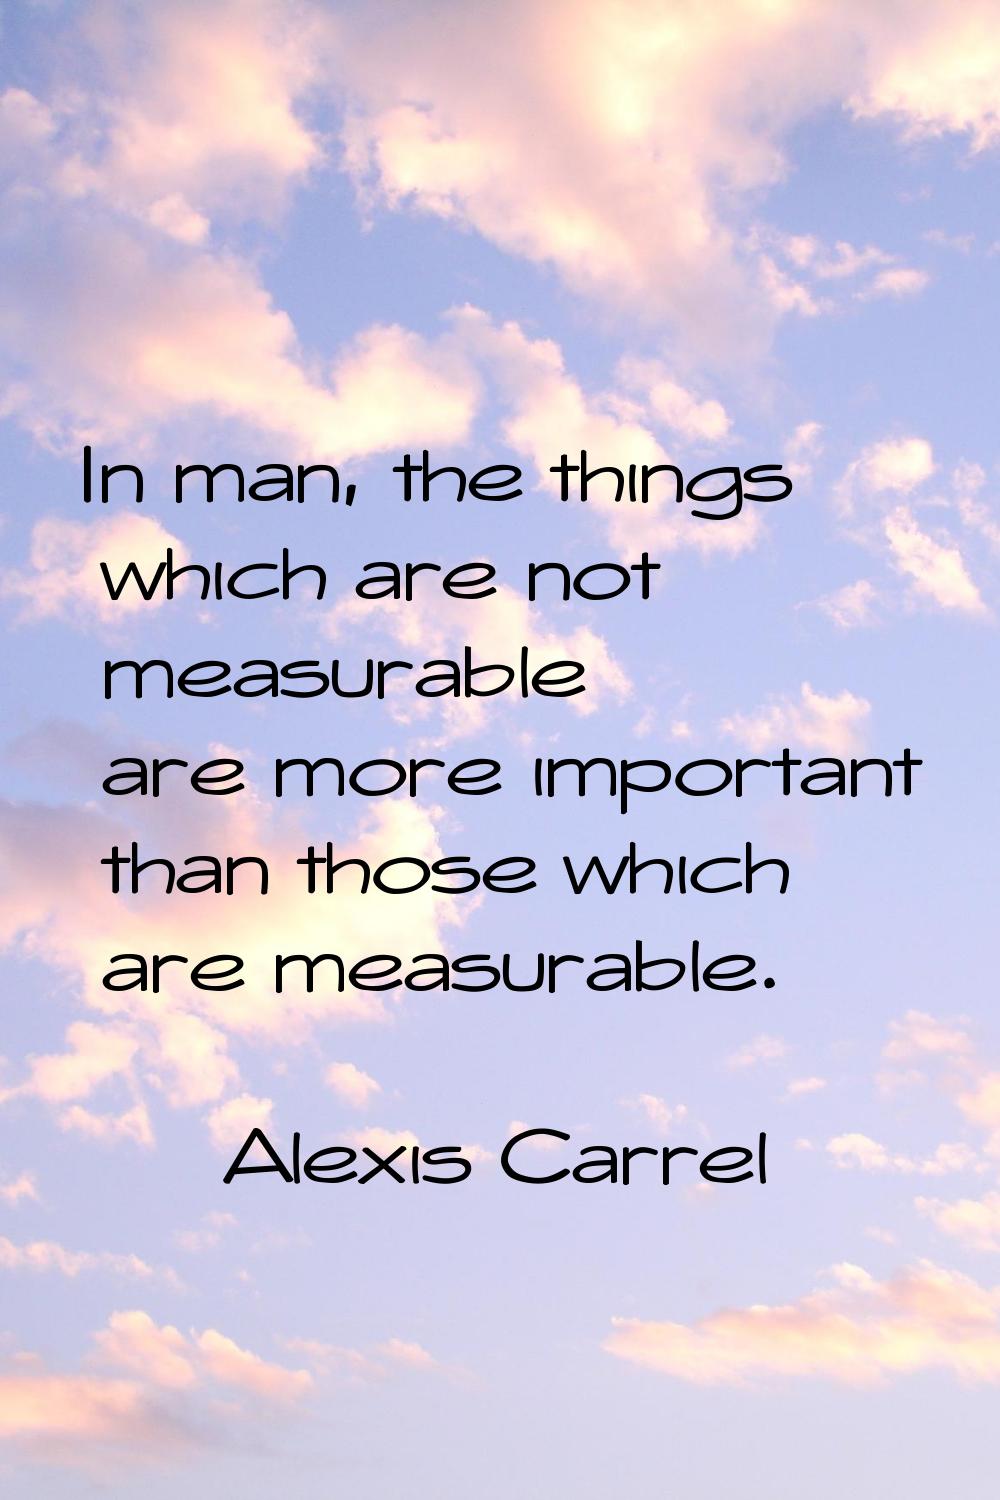 In man, the things which are not measurable are more important than those which are measurable.